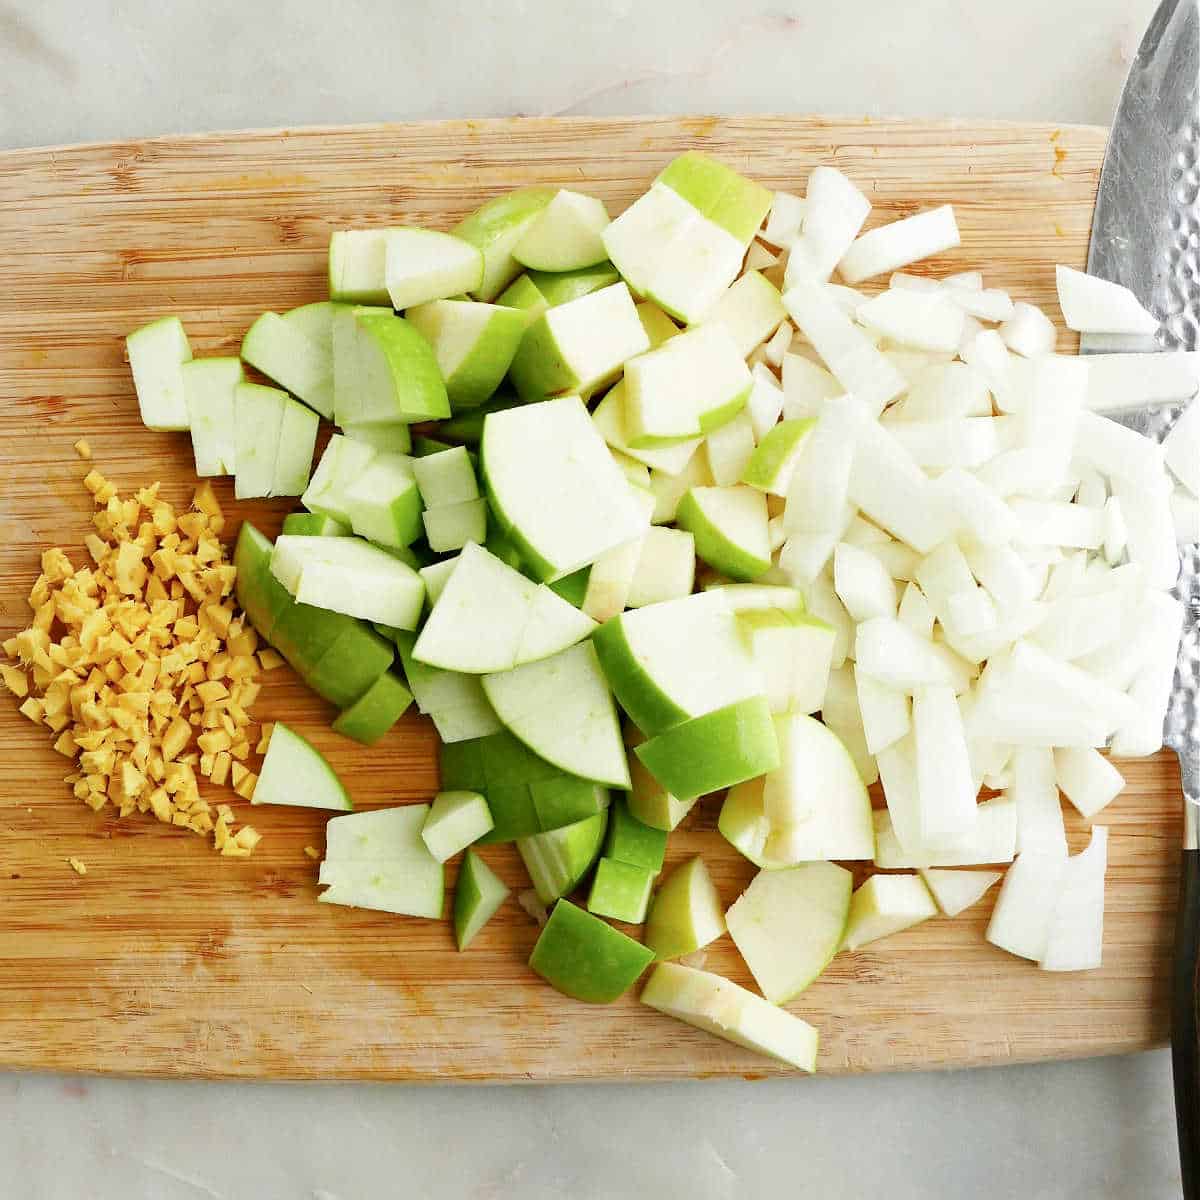 ginger, green apples, and onion diced into pieces on a cutting board